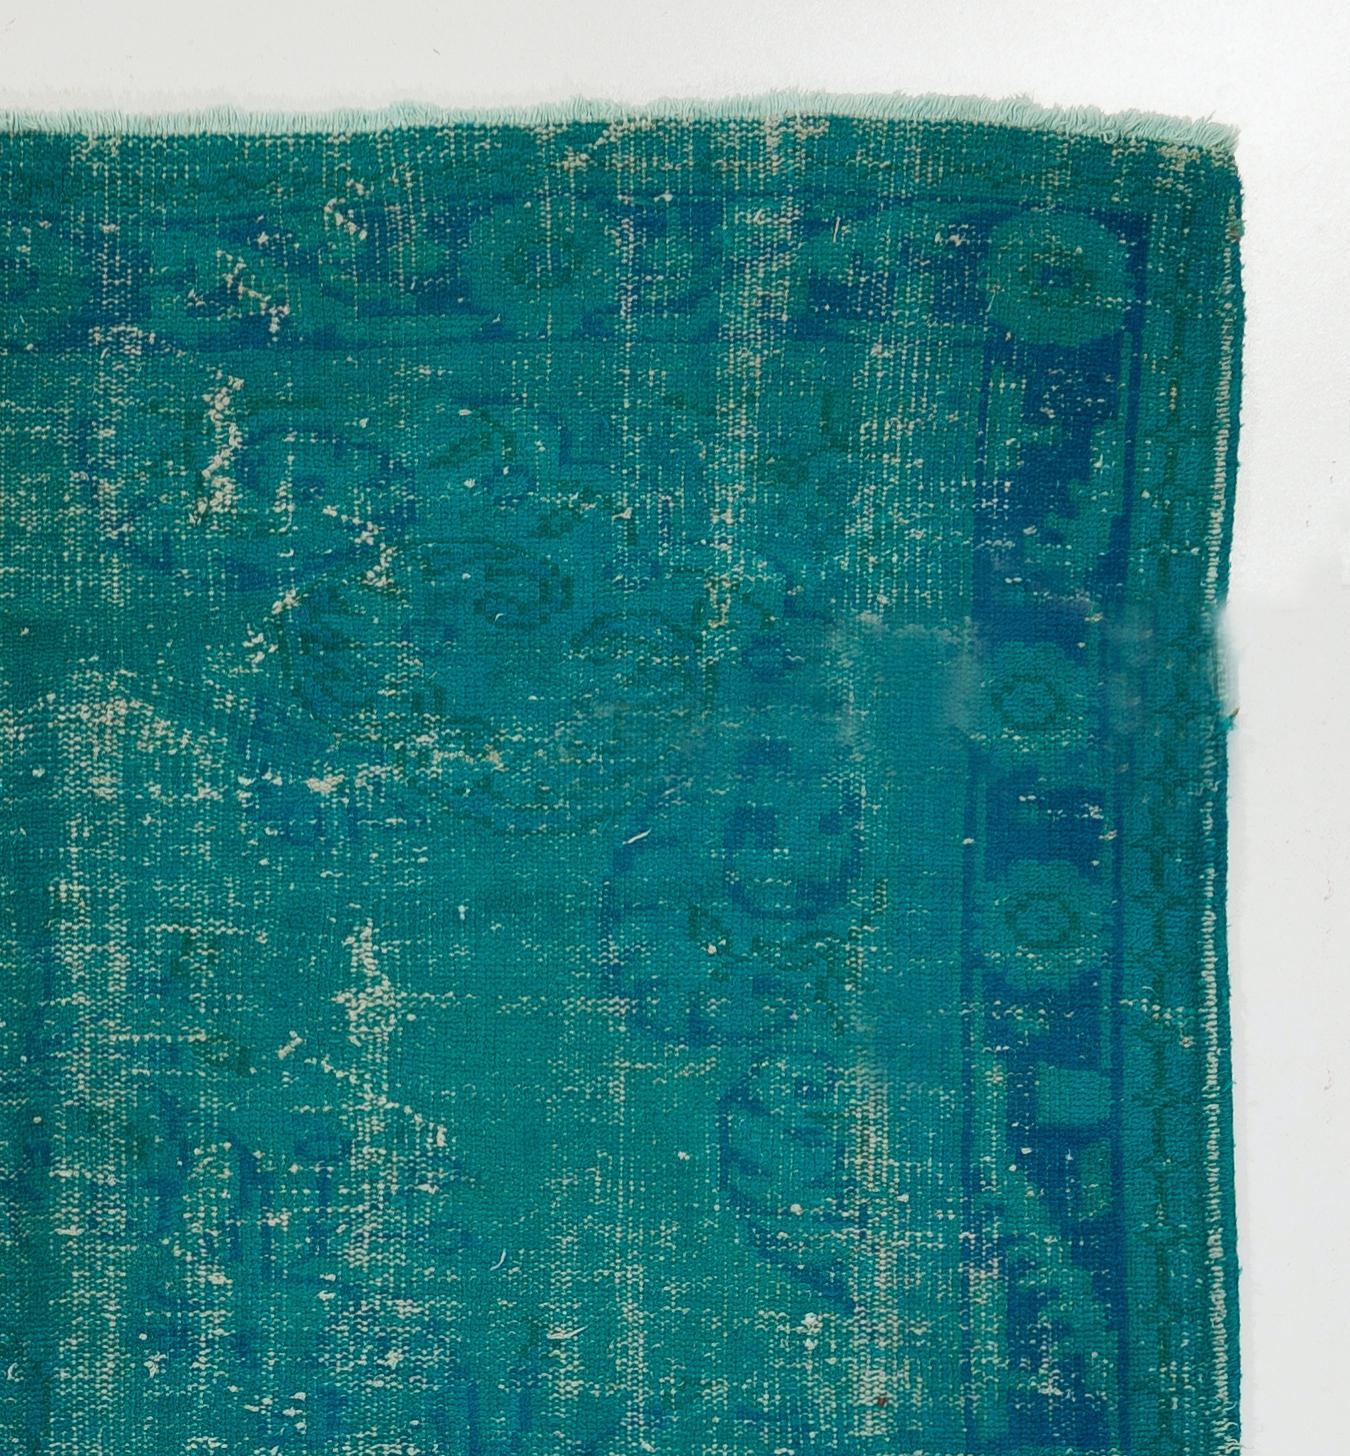 Hand-Woven 6.2x10.4 Ft Vintage Handmade Turkish Rug Over-dyed in Teal for Modern Interiors